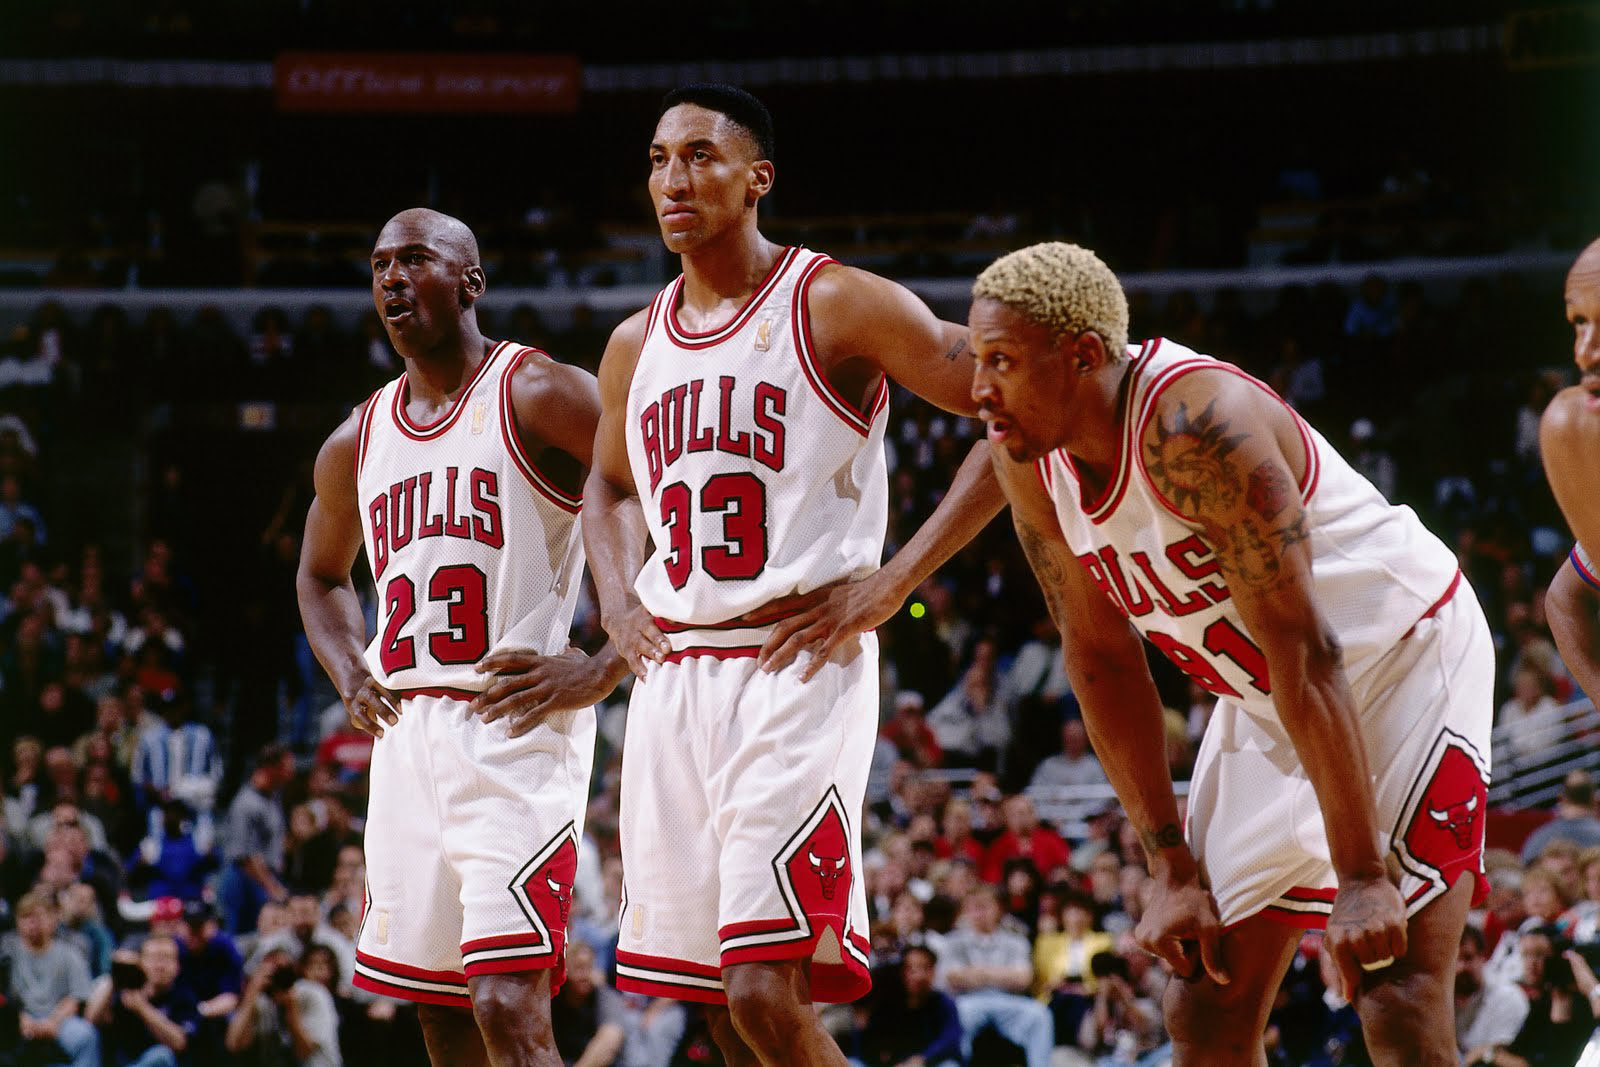 Post Bulls Rodman. Went from playing with Jordan & Pippen to playing with  Shaq & Kobe. I wouldn't complain. Just like Steve Kerr lol. Went from a  Bulls 3peat to winning another